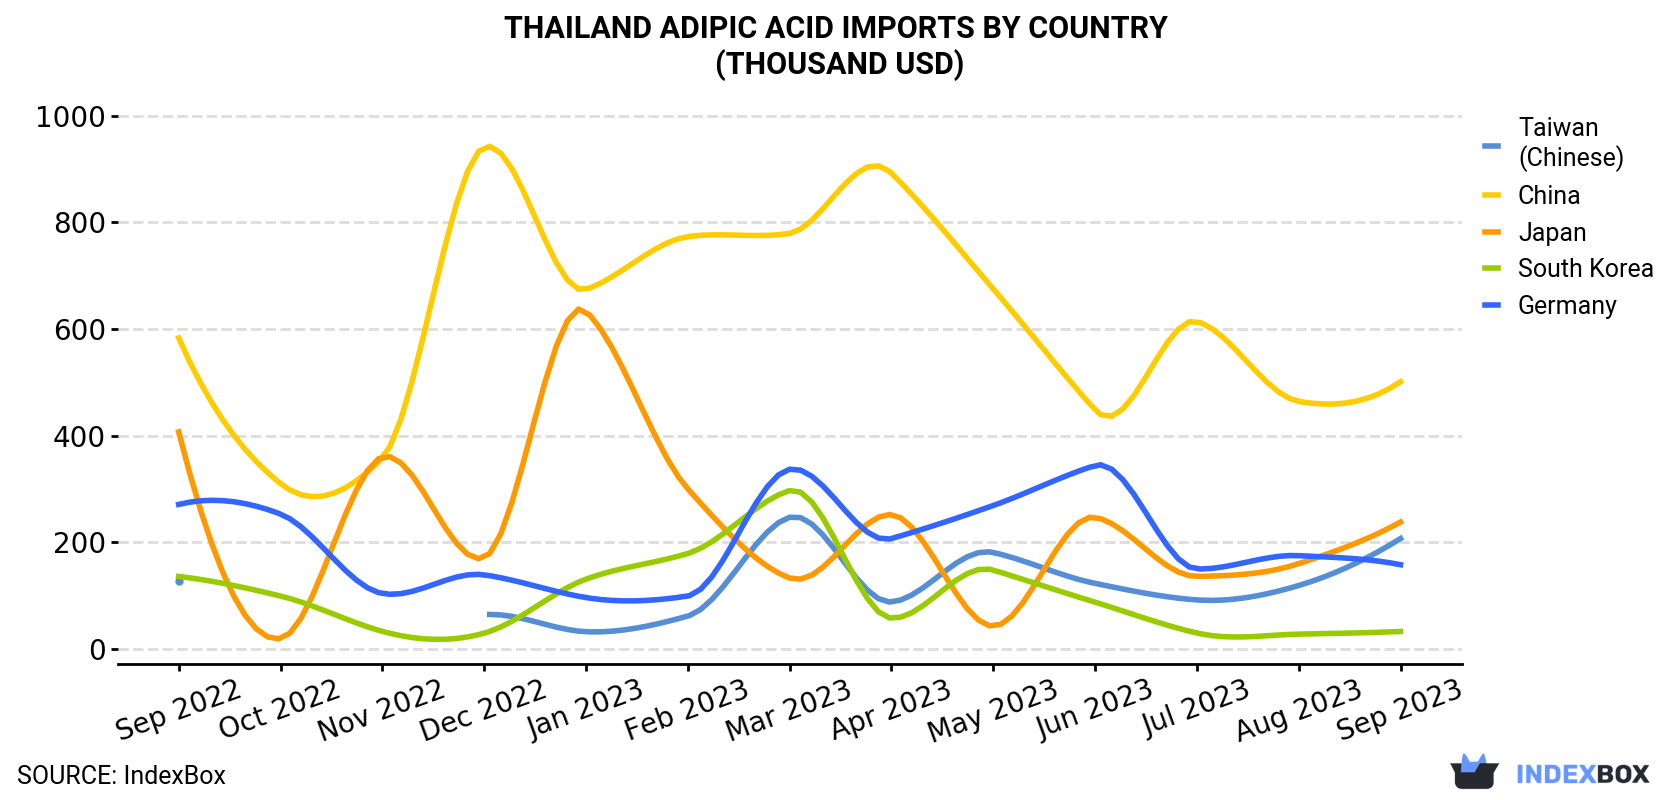 Thailand Adipic Acid Imports By Country (Thousand USD)